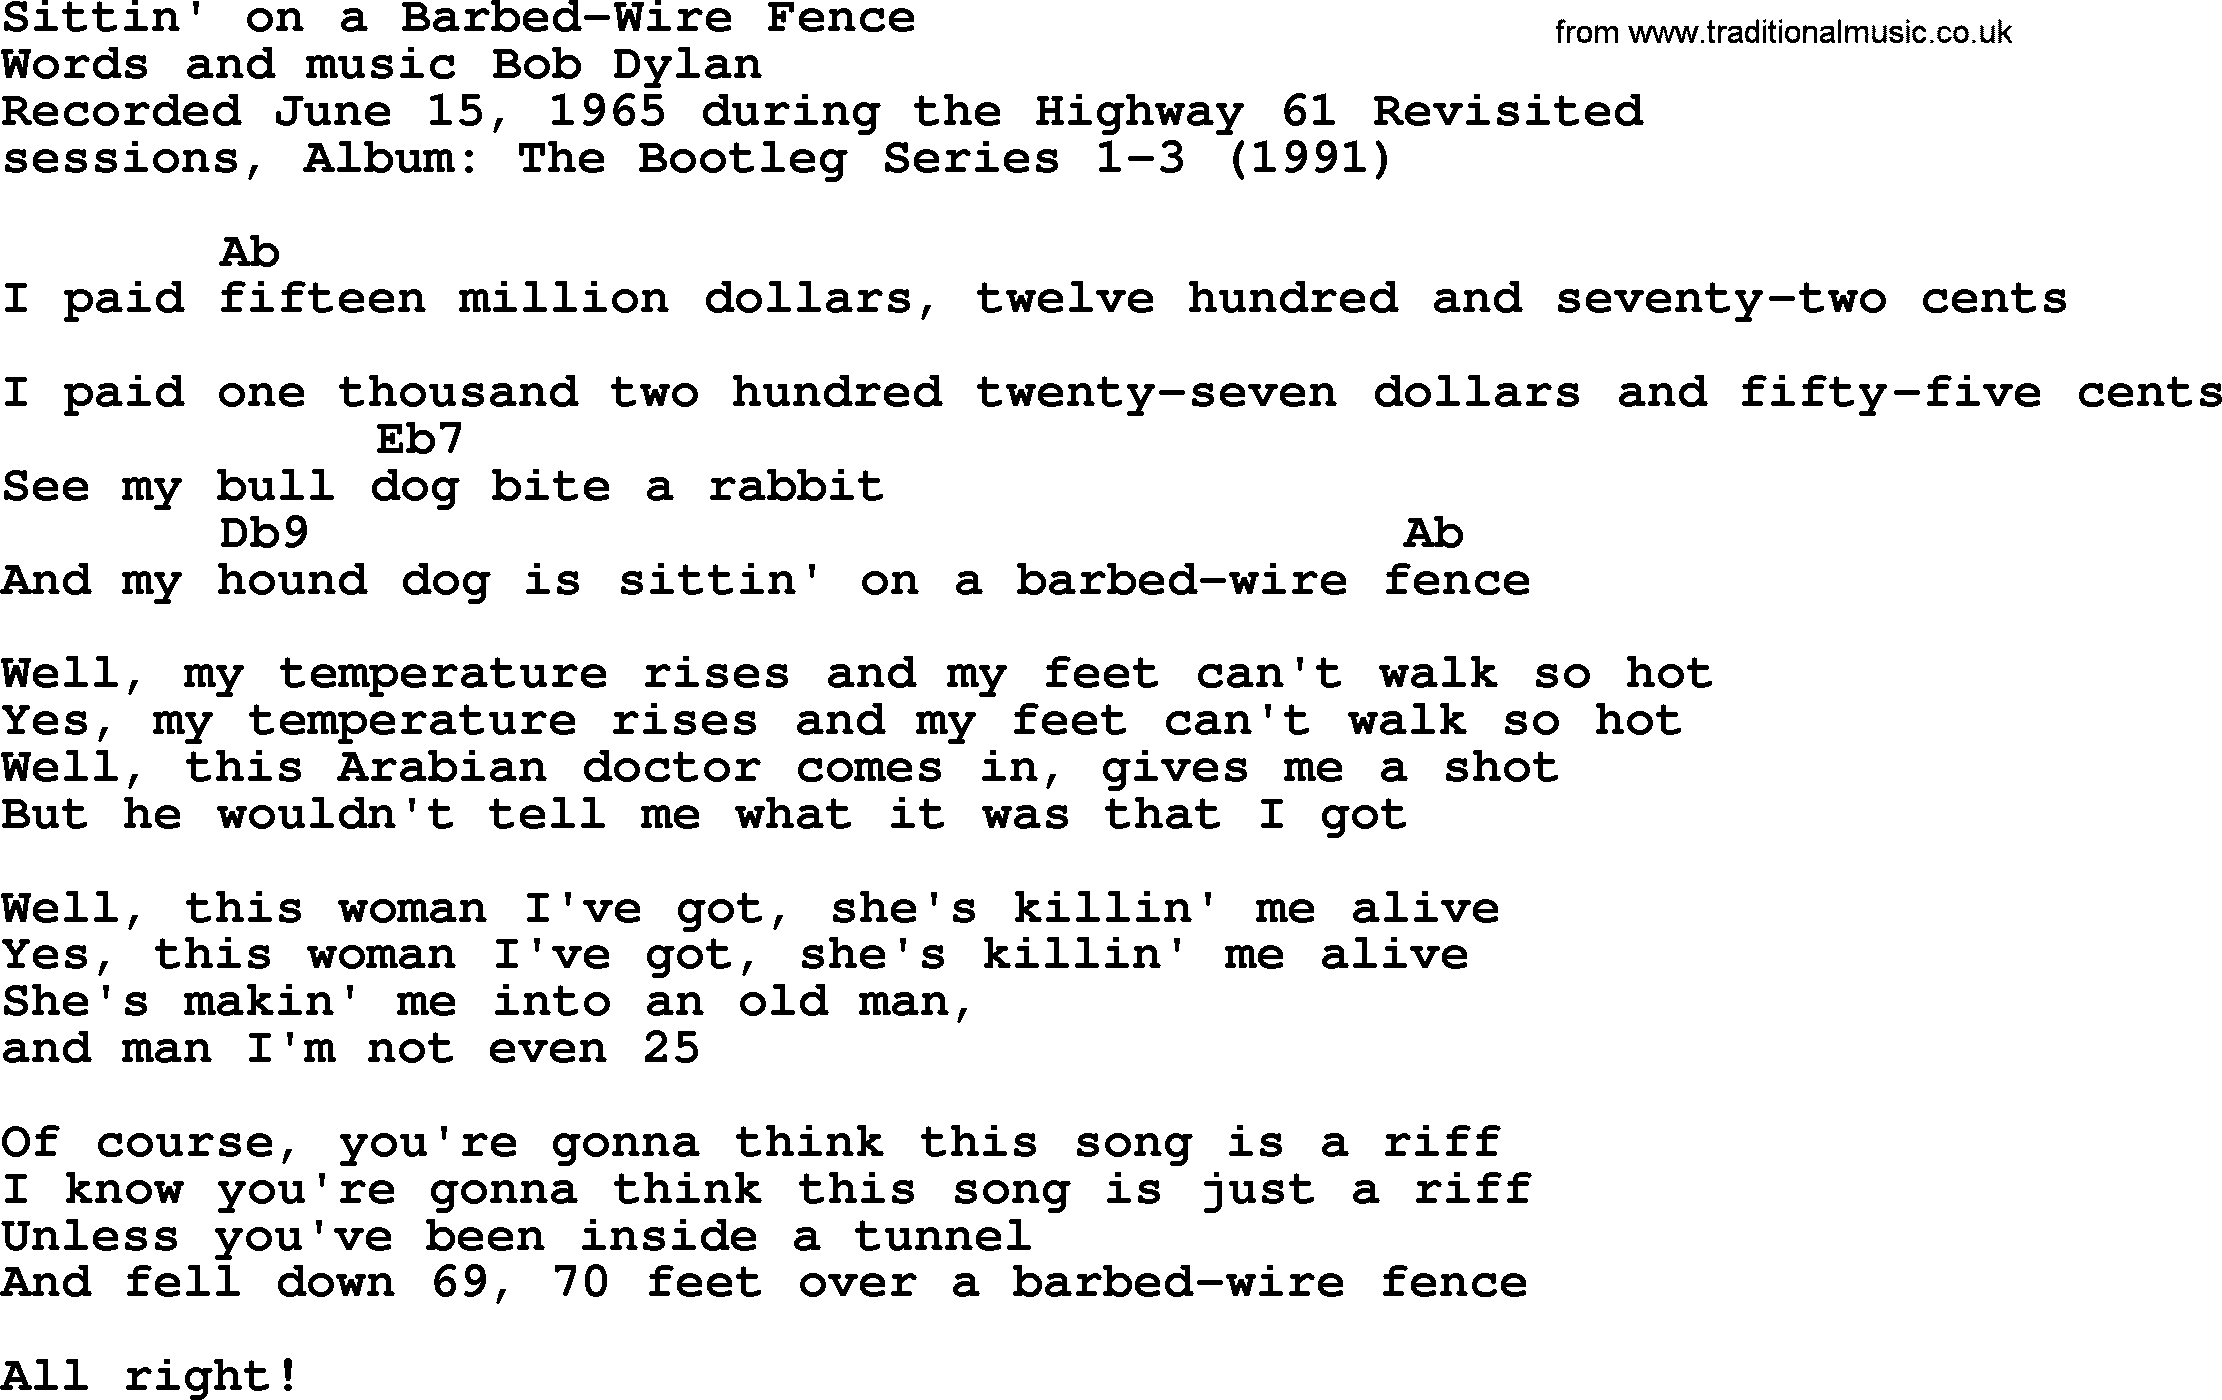 Bob Dylan song, lyrics with chords - Sittin' on a Barbed-Wire Fence